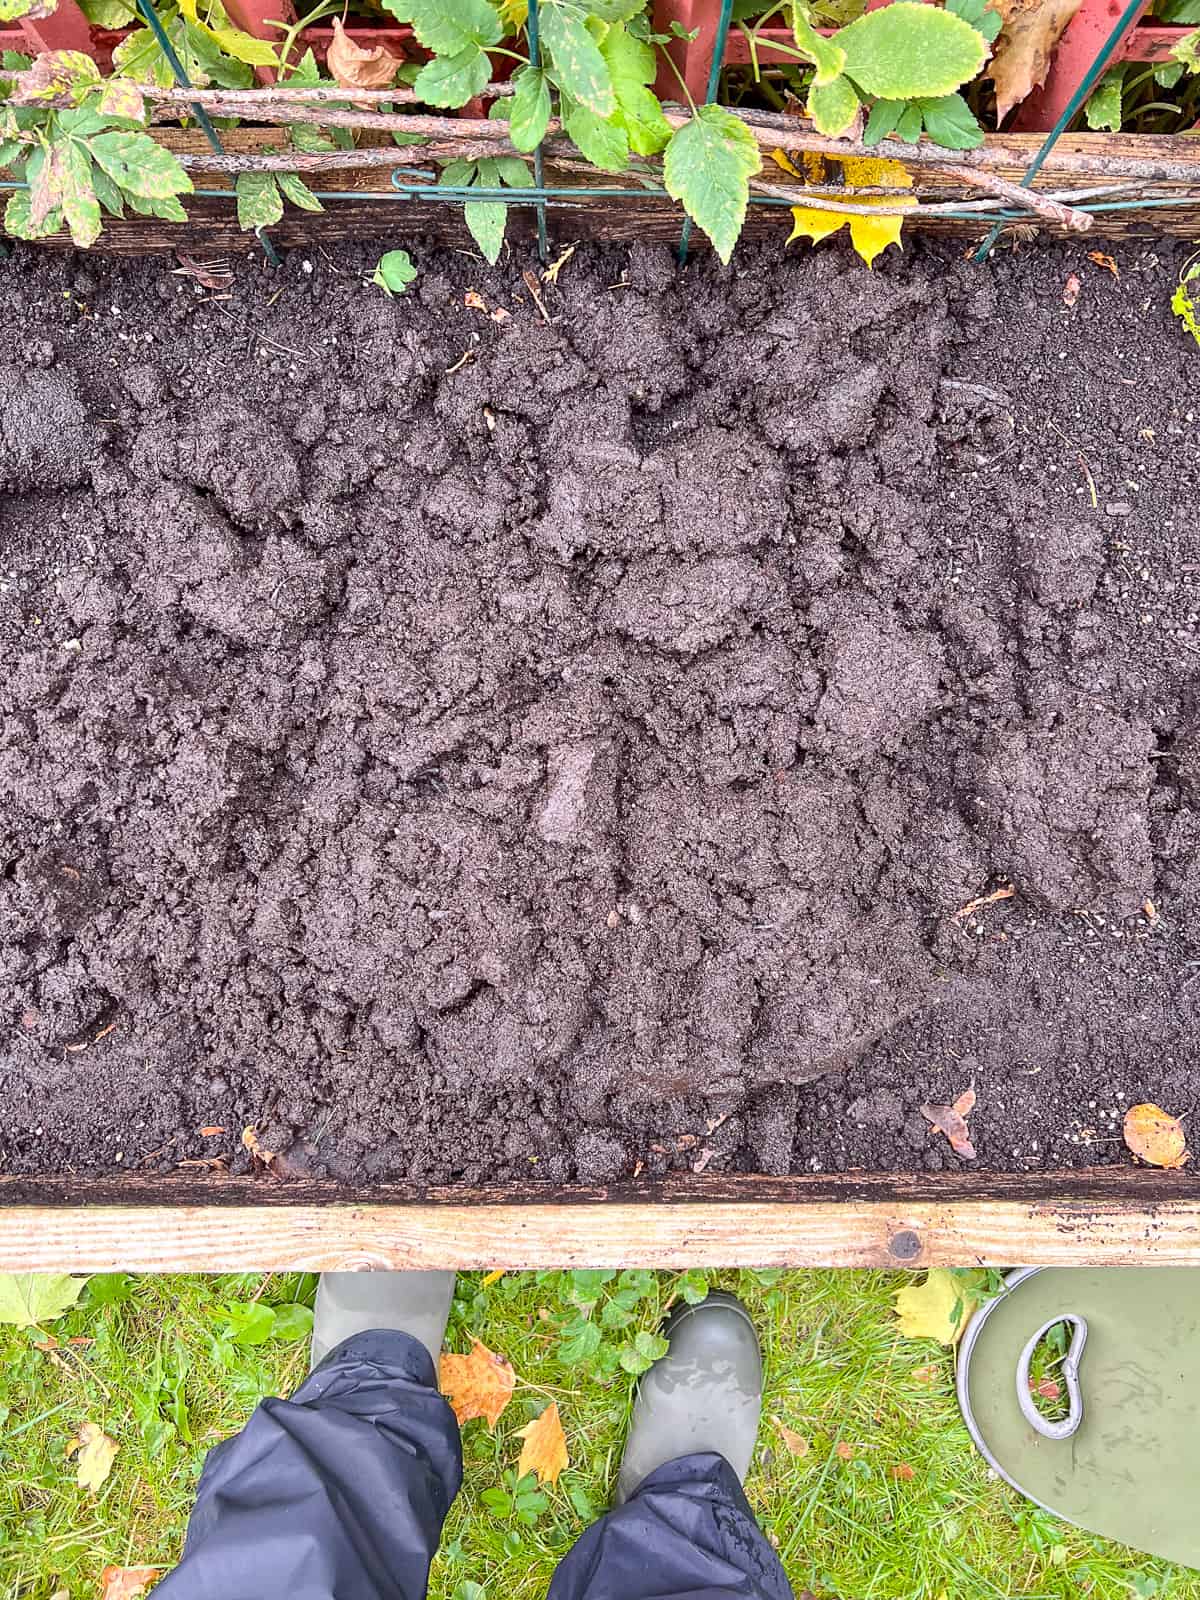 An image of compost dumped on top of the soil of a raised bed ready to be mixed in, during seasonal garden maintenance.